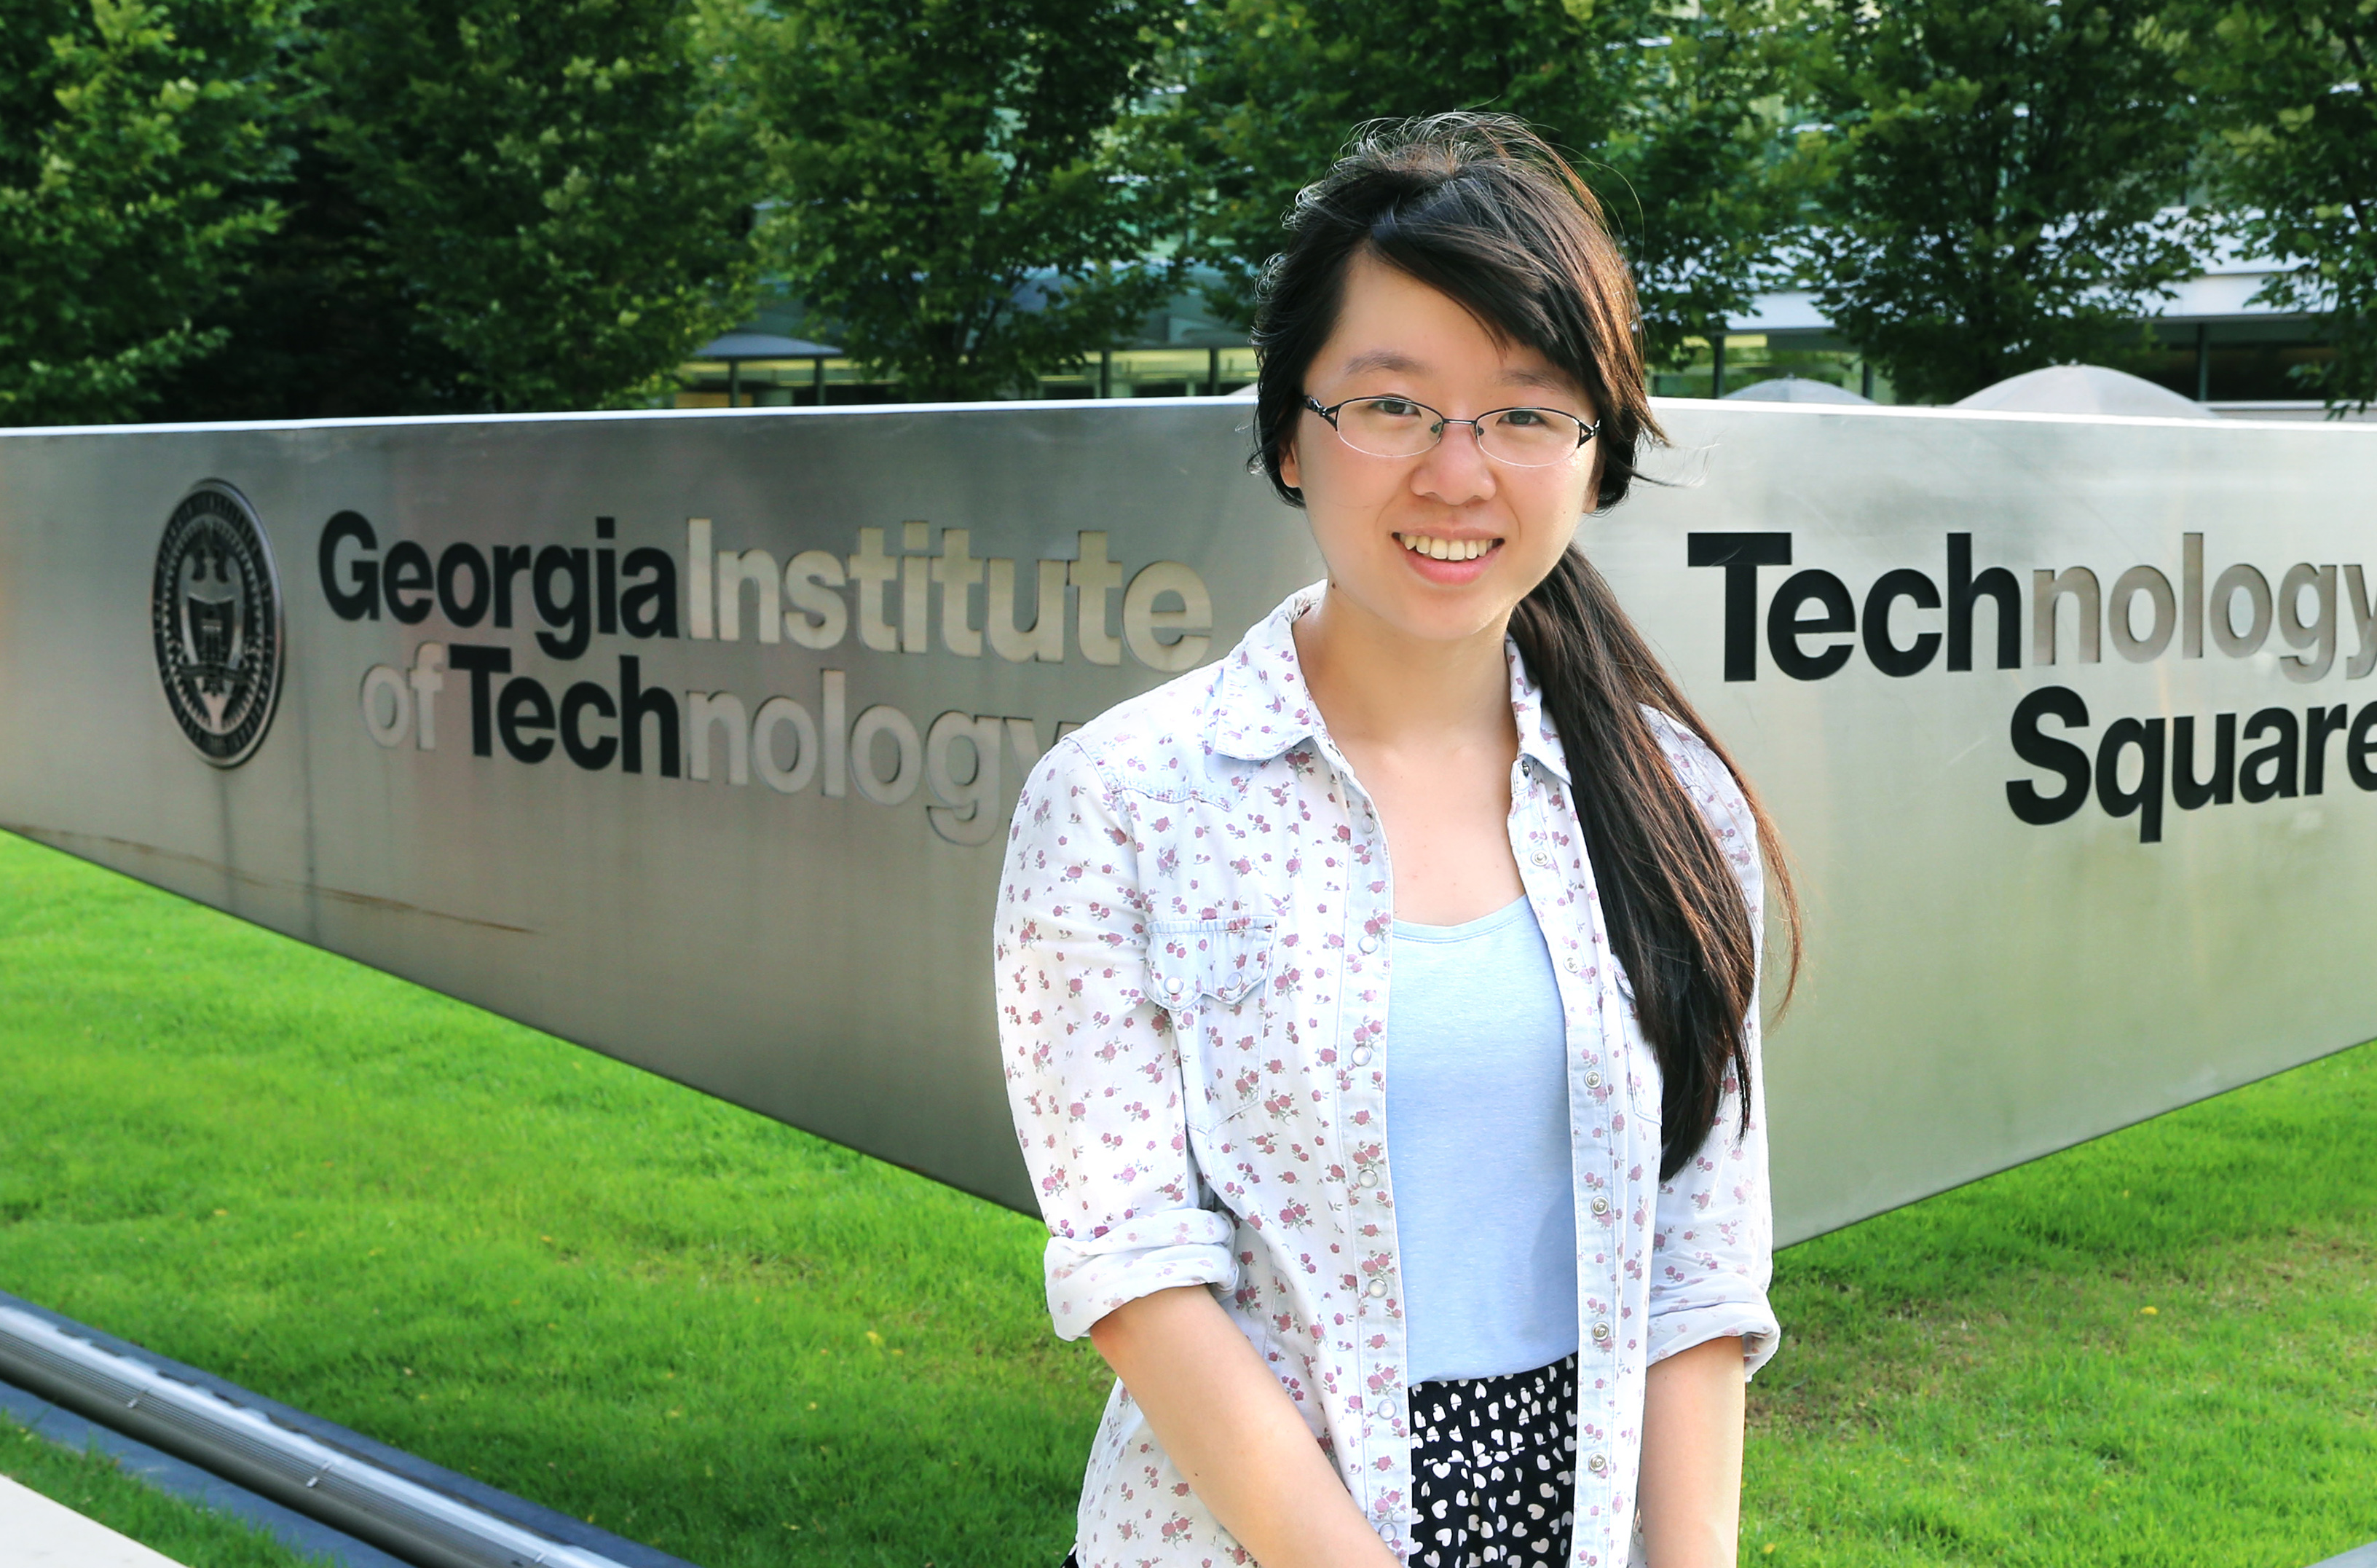 A study of cloud hosting services has found that as many as 10 percent of the repositories hosted by them have been compromised. Shown is Georgia Tech graduate student Xiaojing Liao, first author of the paper reporting on the research.(Credit: Goergia Tech)